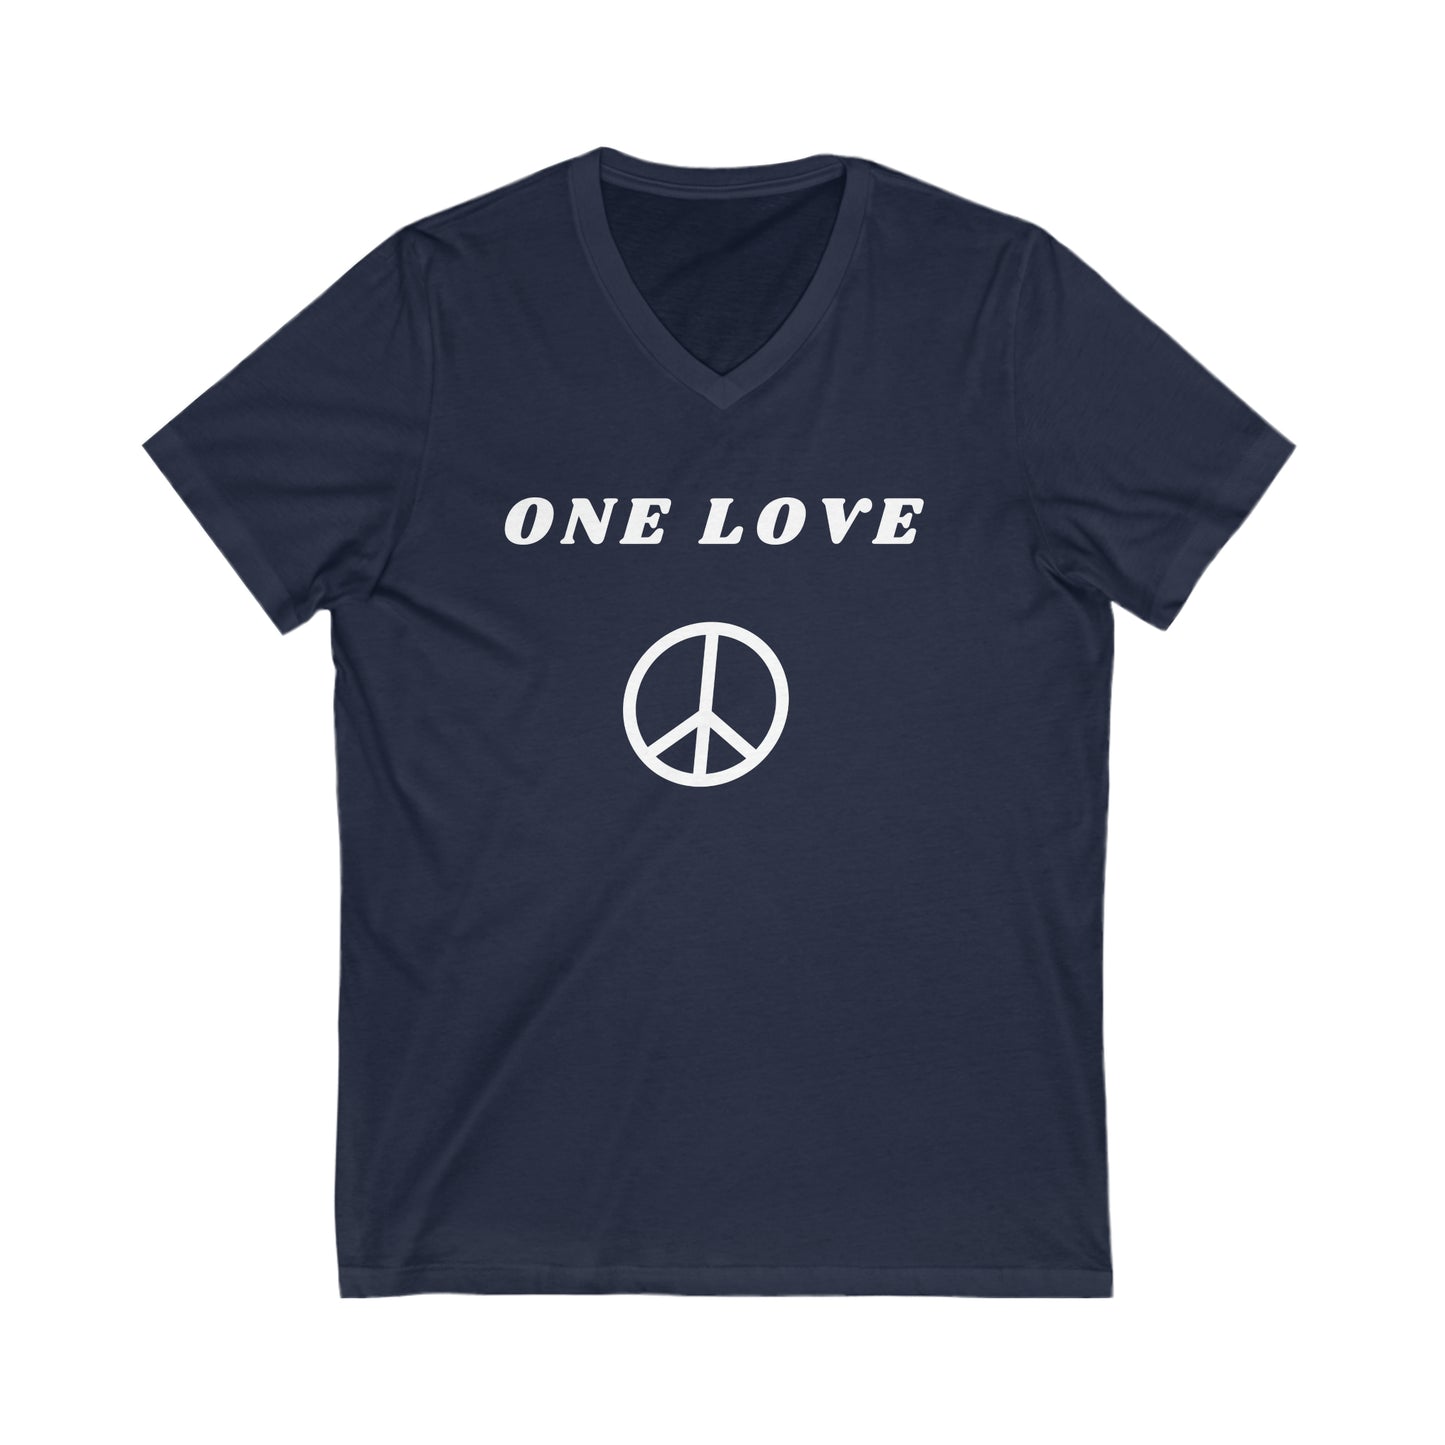 ONE LOVE AND PEACE UNISEX V NECK SHIRTS